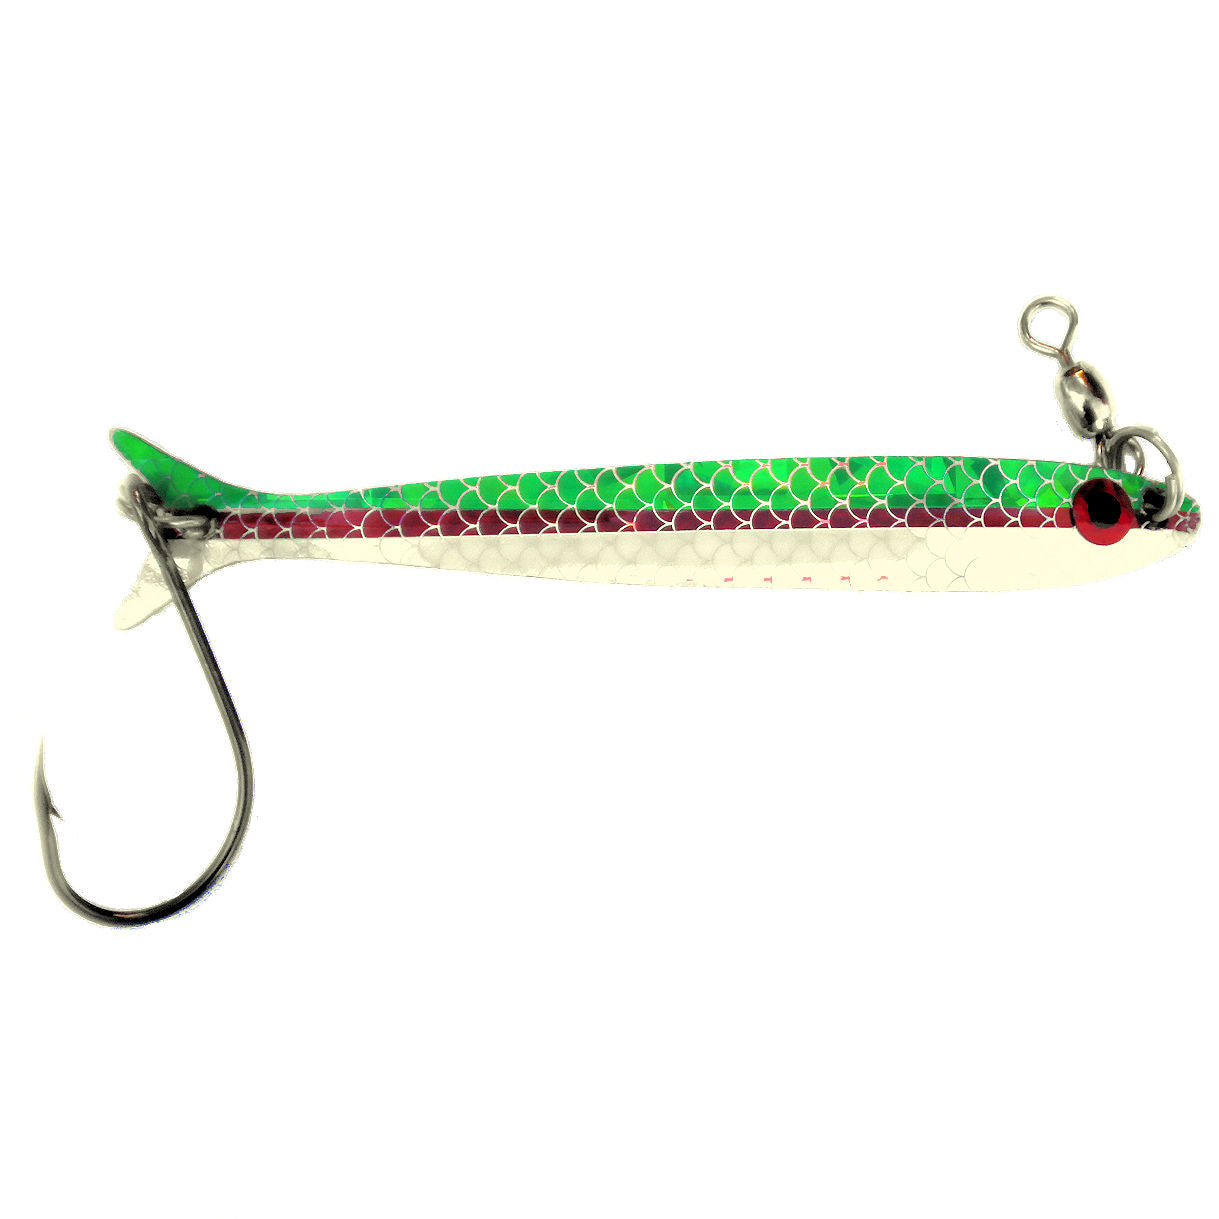 Krippled KC Needle fish Spoon, Army Truck – Krippled Fishing Lures